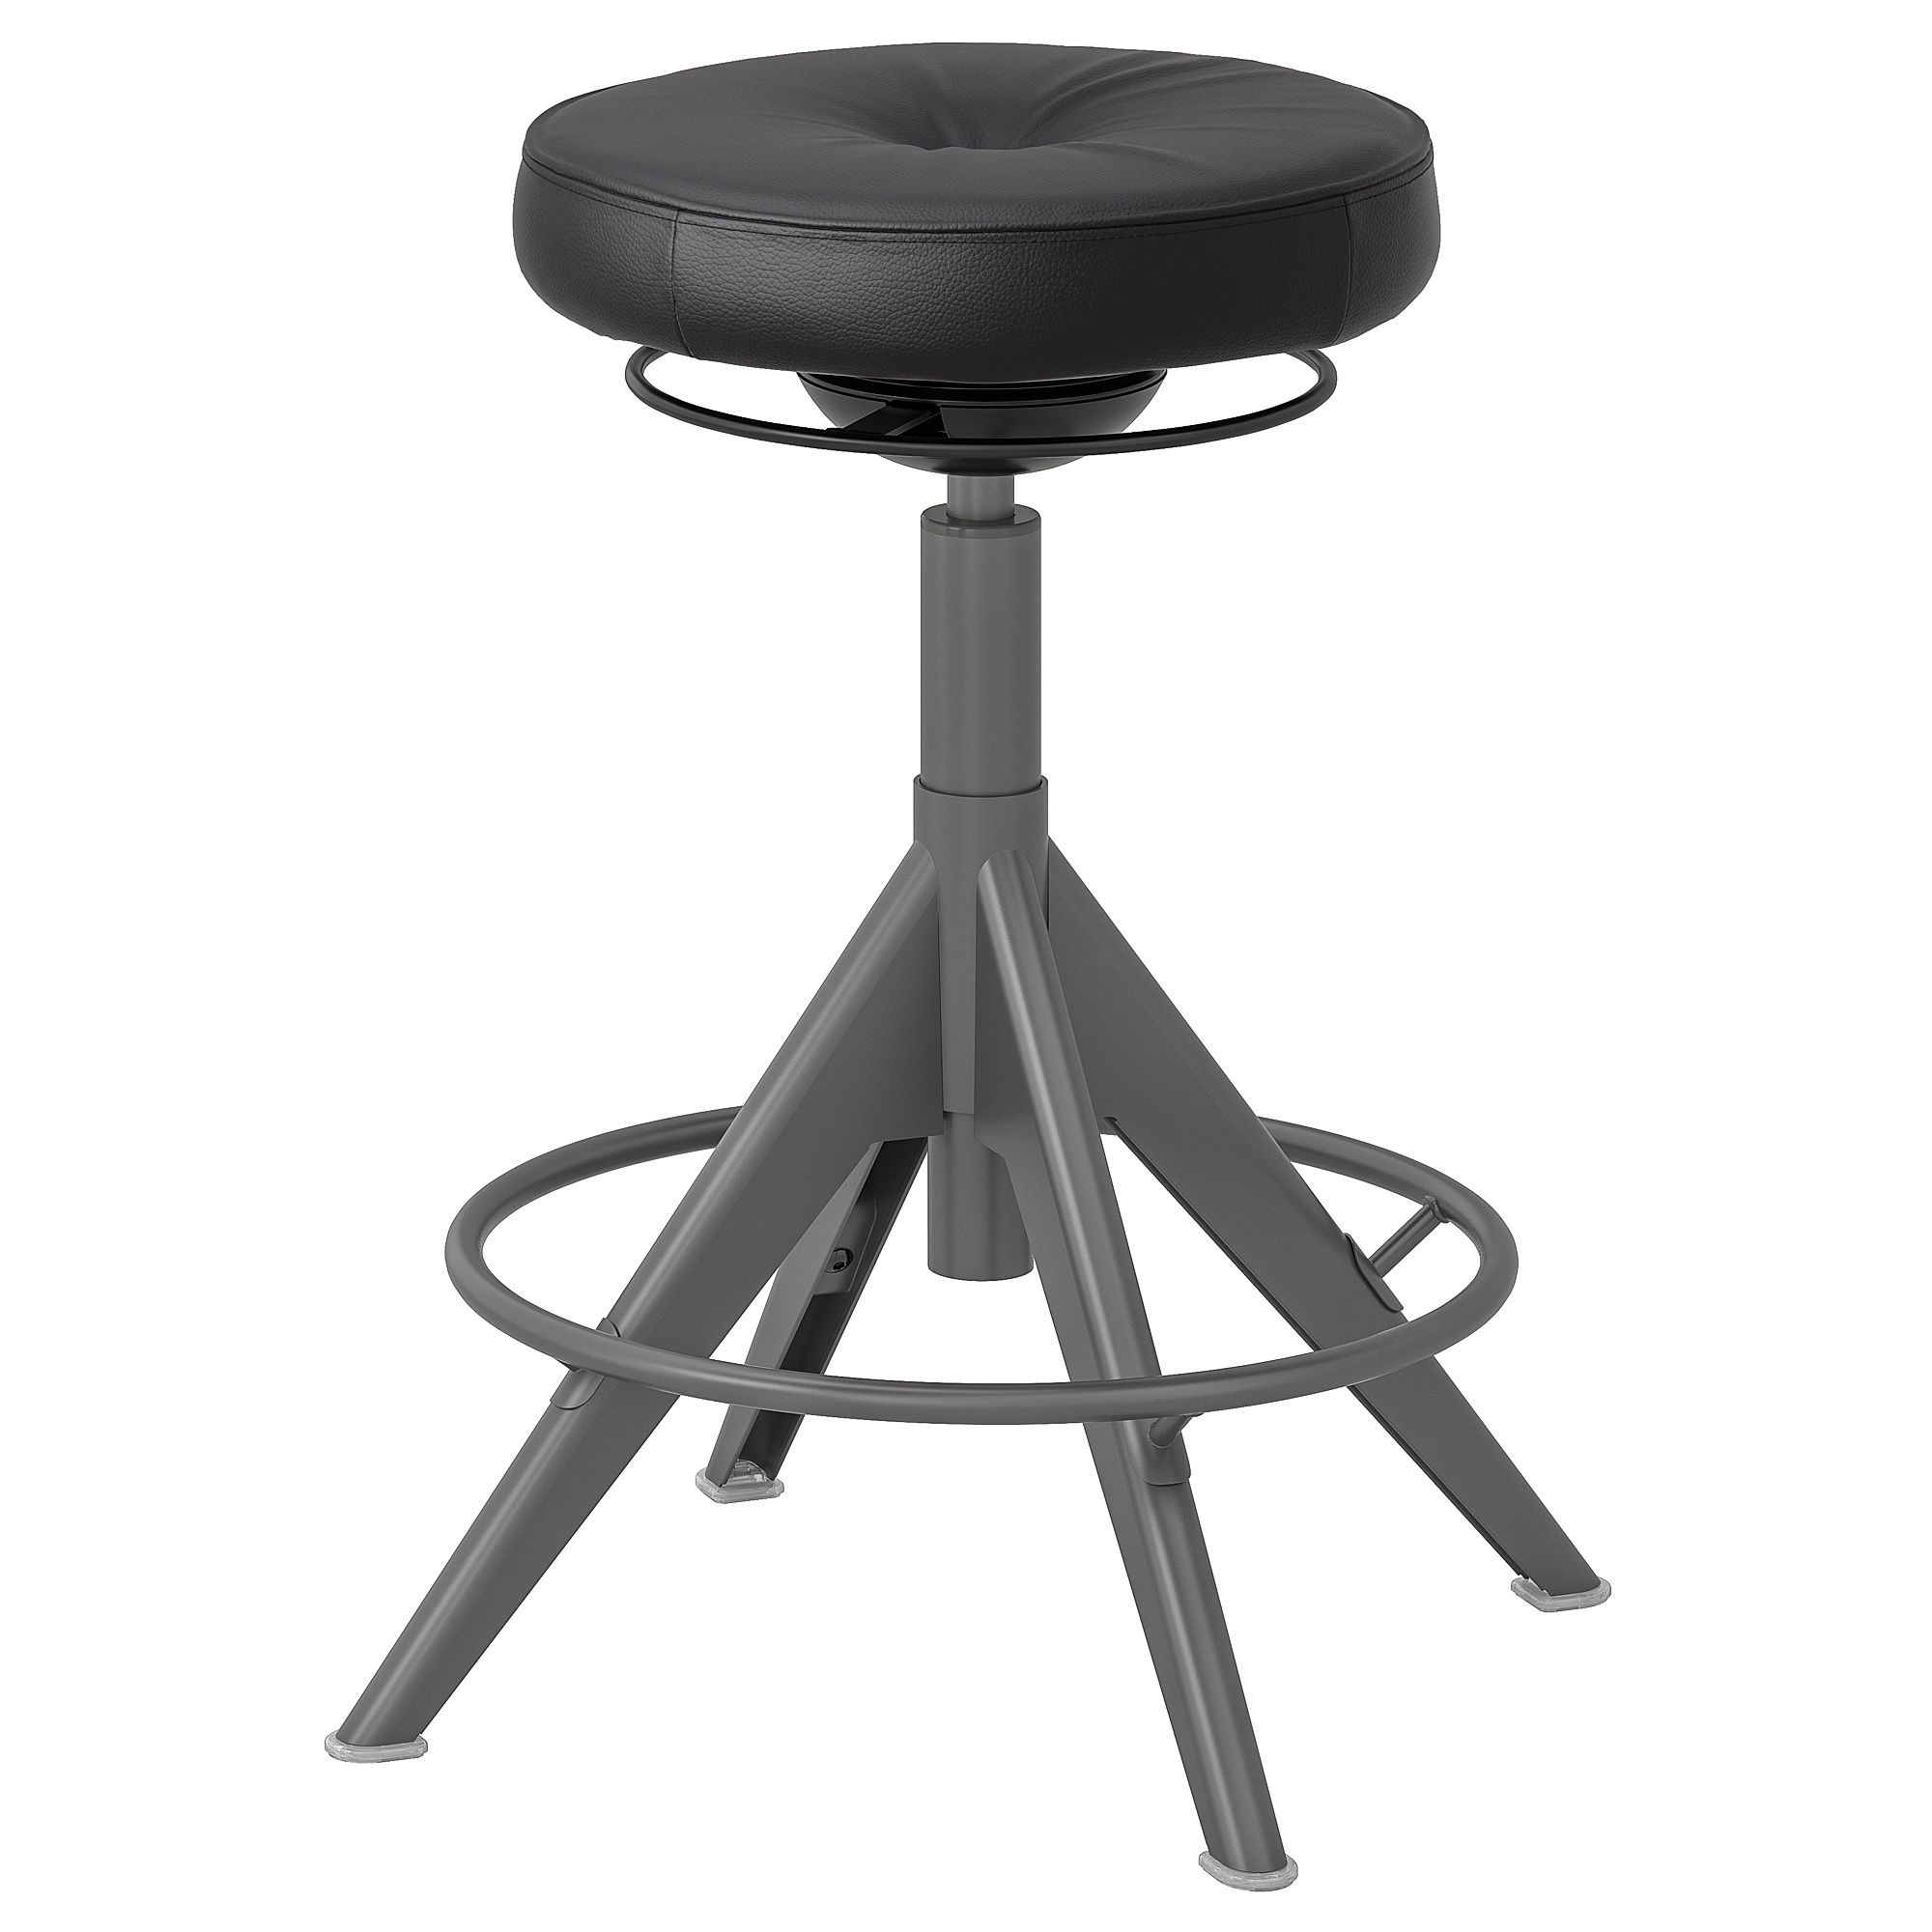 TROLLBERGET active sit/stand support